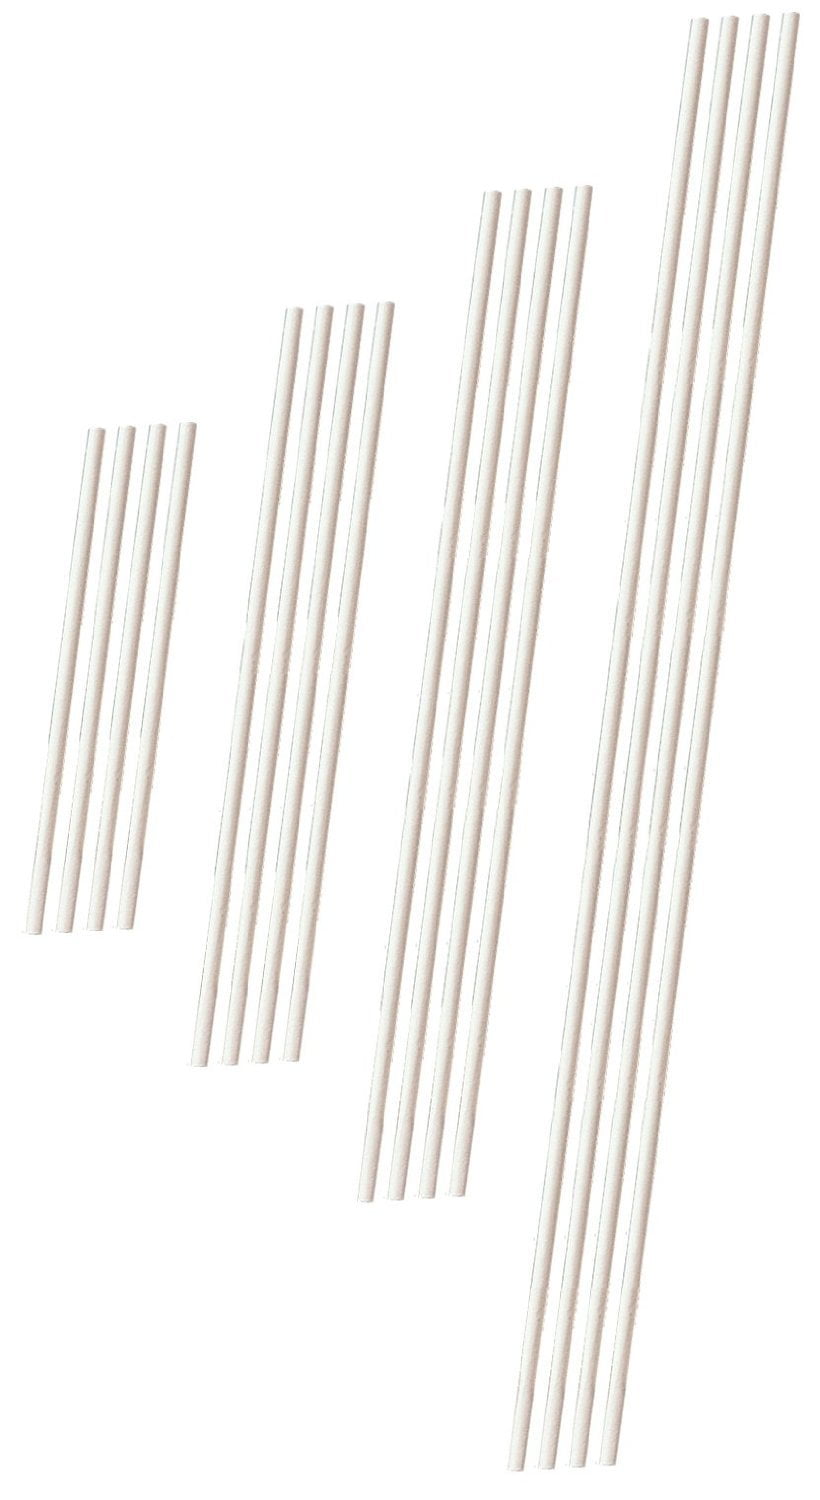 Solid Crystal Clear Acrylic Cake Topper Sticks - 3.5 long - 25-pack